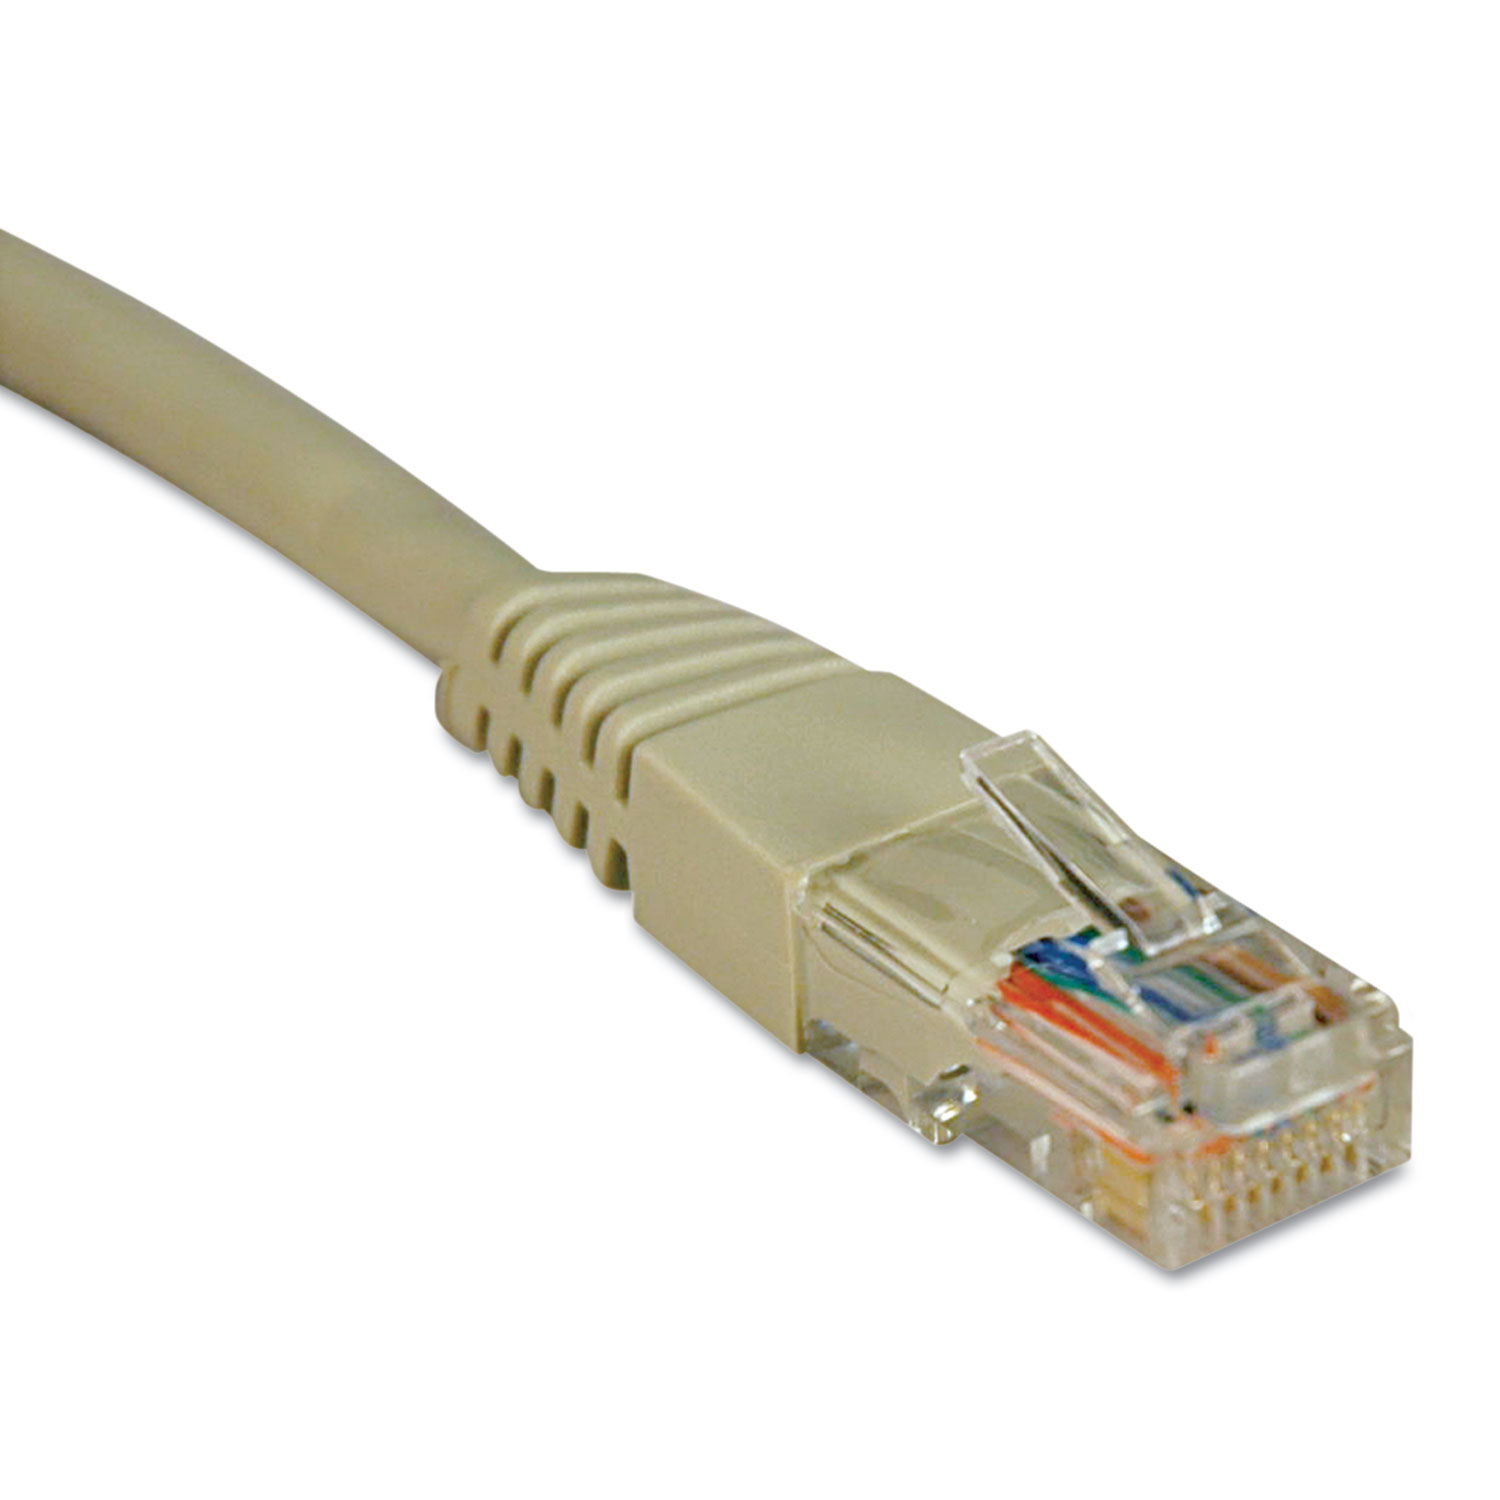  Tripp Lite N002-002-GY Cat5e 350MHz Molded Patch Cable, RJ45 (M/M), 2 ft., Gray (TRPN002002GY) 